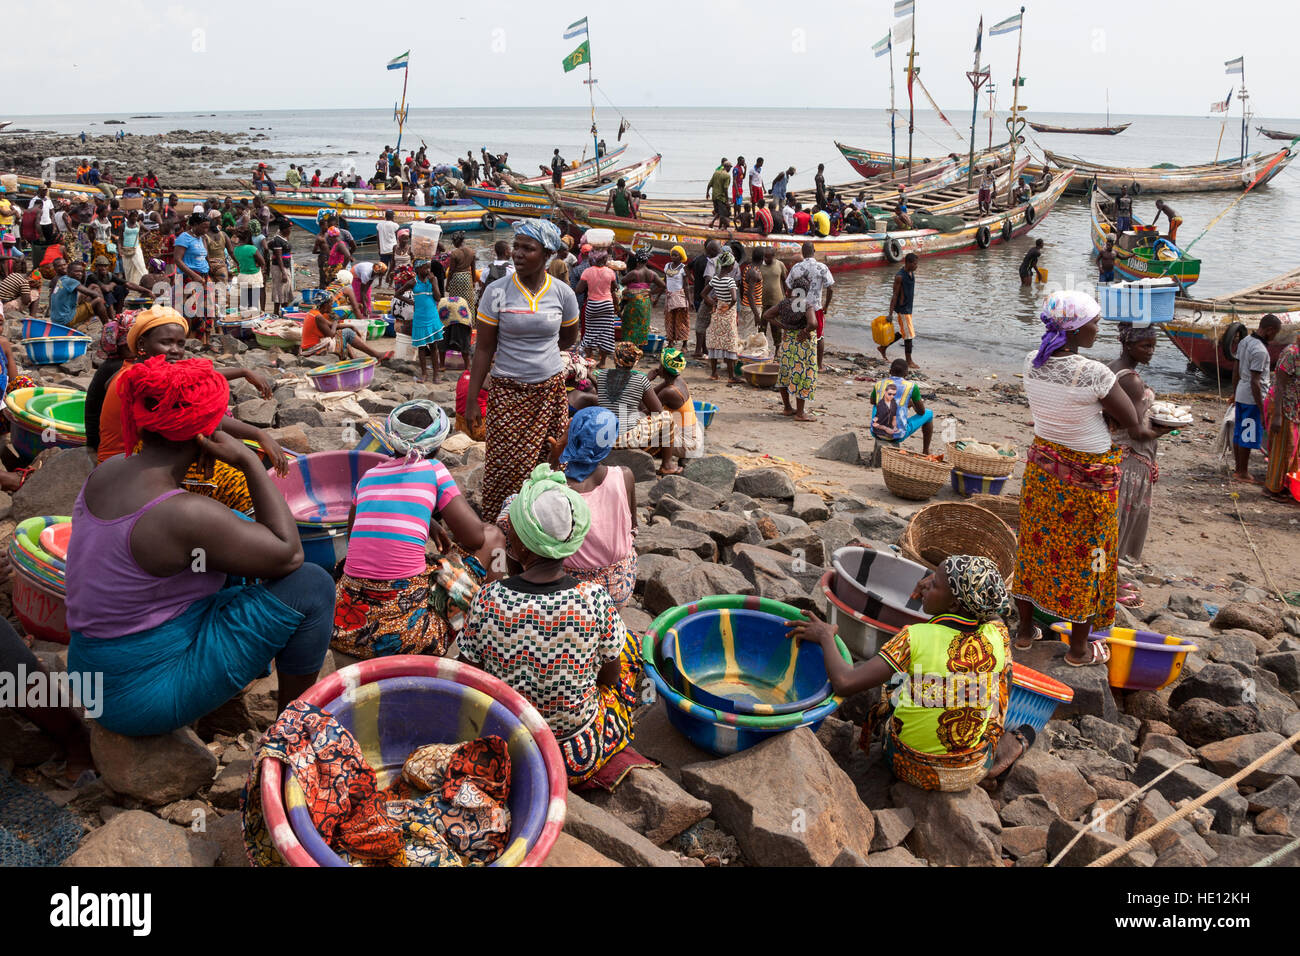 Busy traffic on beach in Tombo Harbour, Sierra Leone. Women are waiting for more fishing boats to arrive. Stock Photo